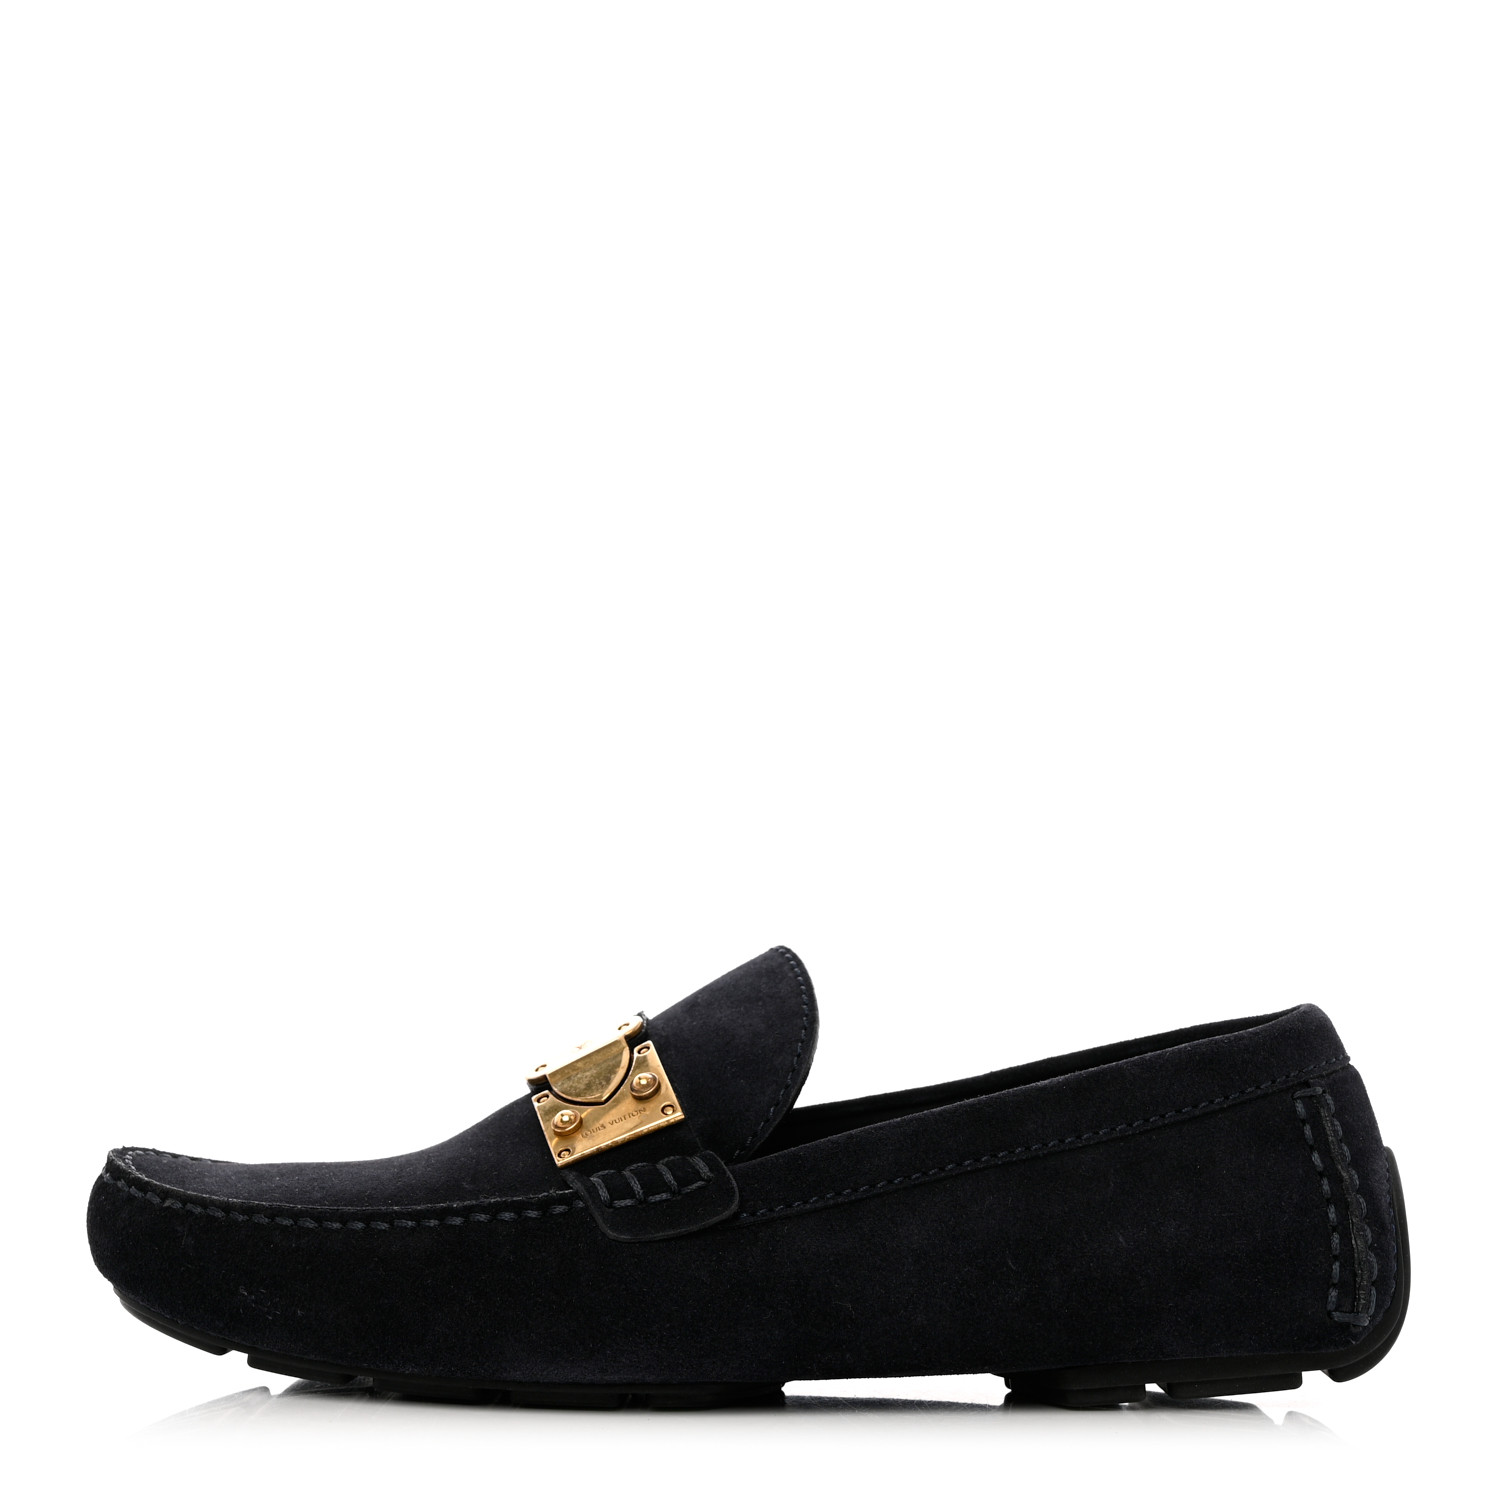 side view of LOUIS VUITTON Suede Racetrack Moccasin Loafers in the color Marine by FASHIONPHILE